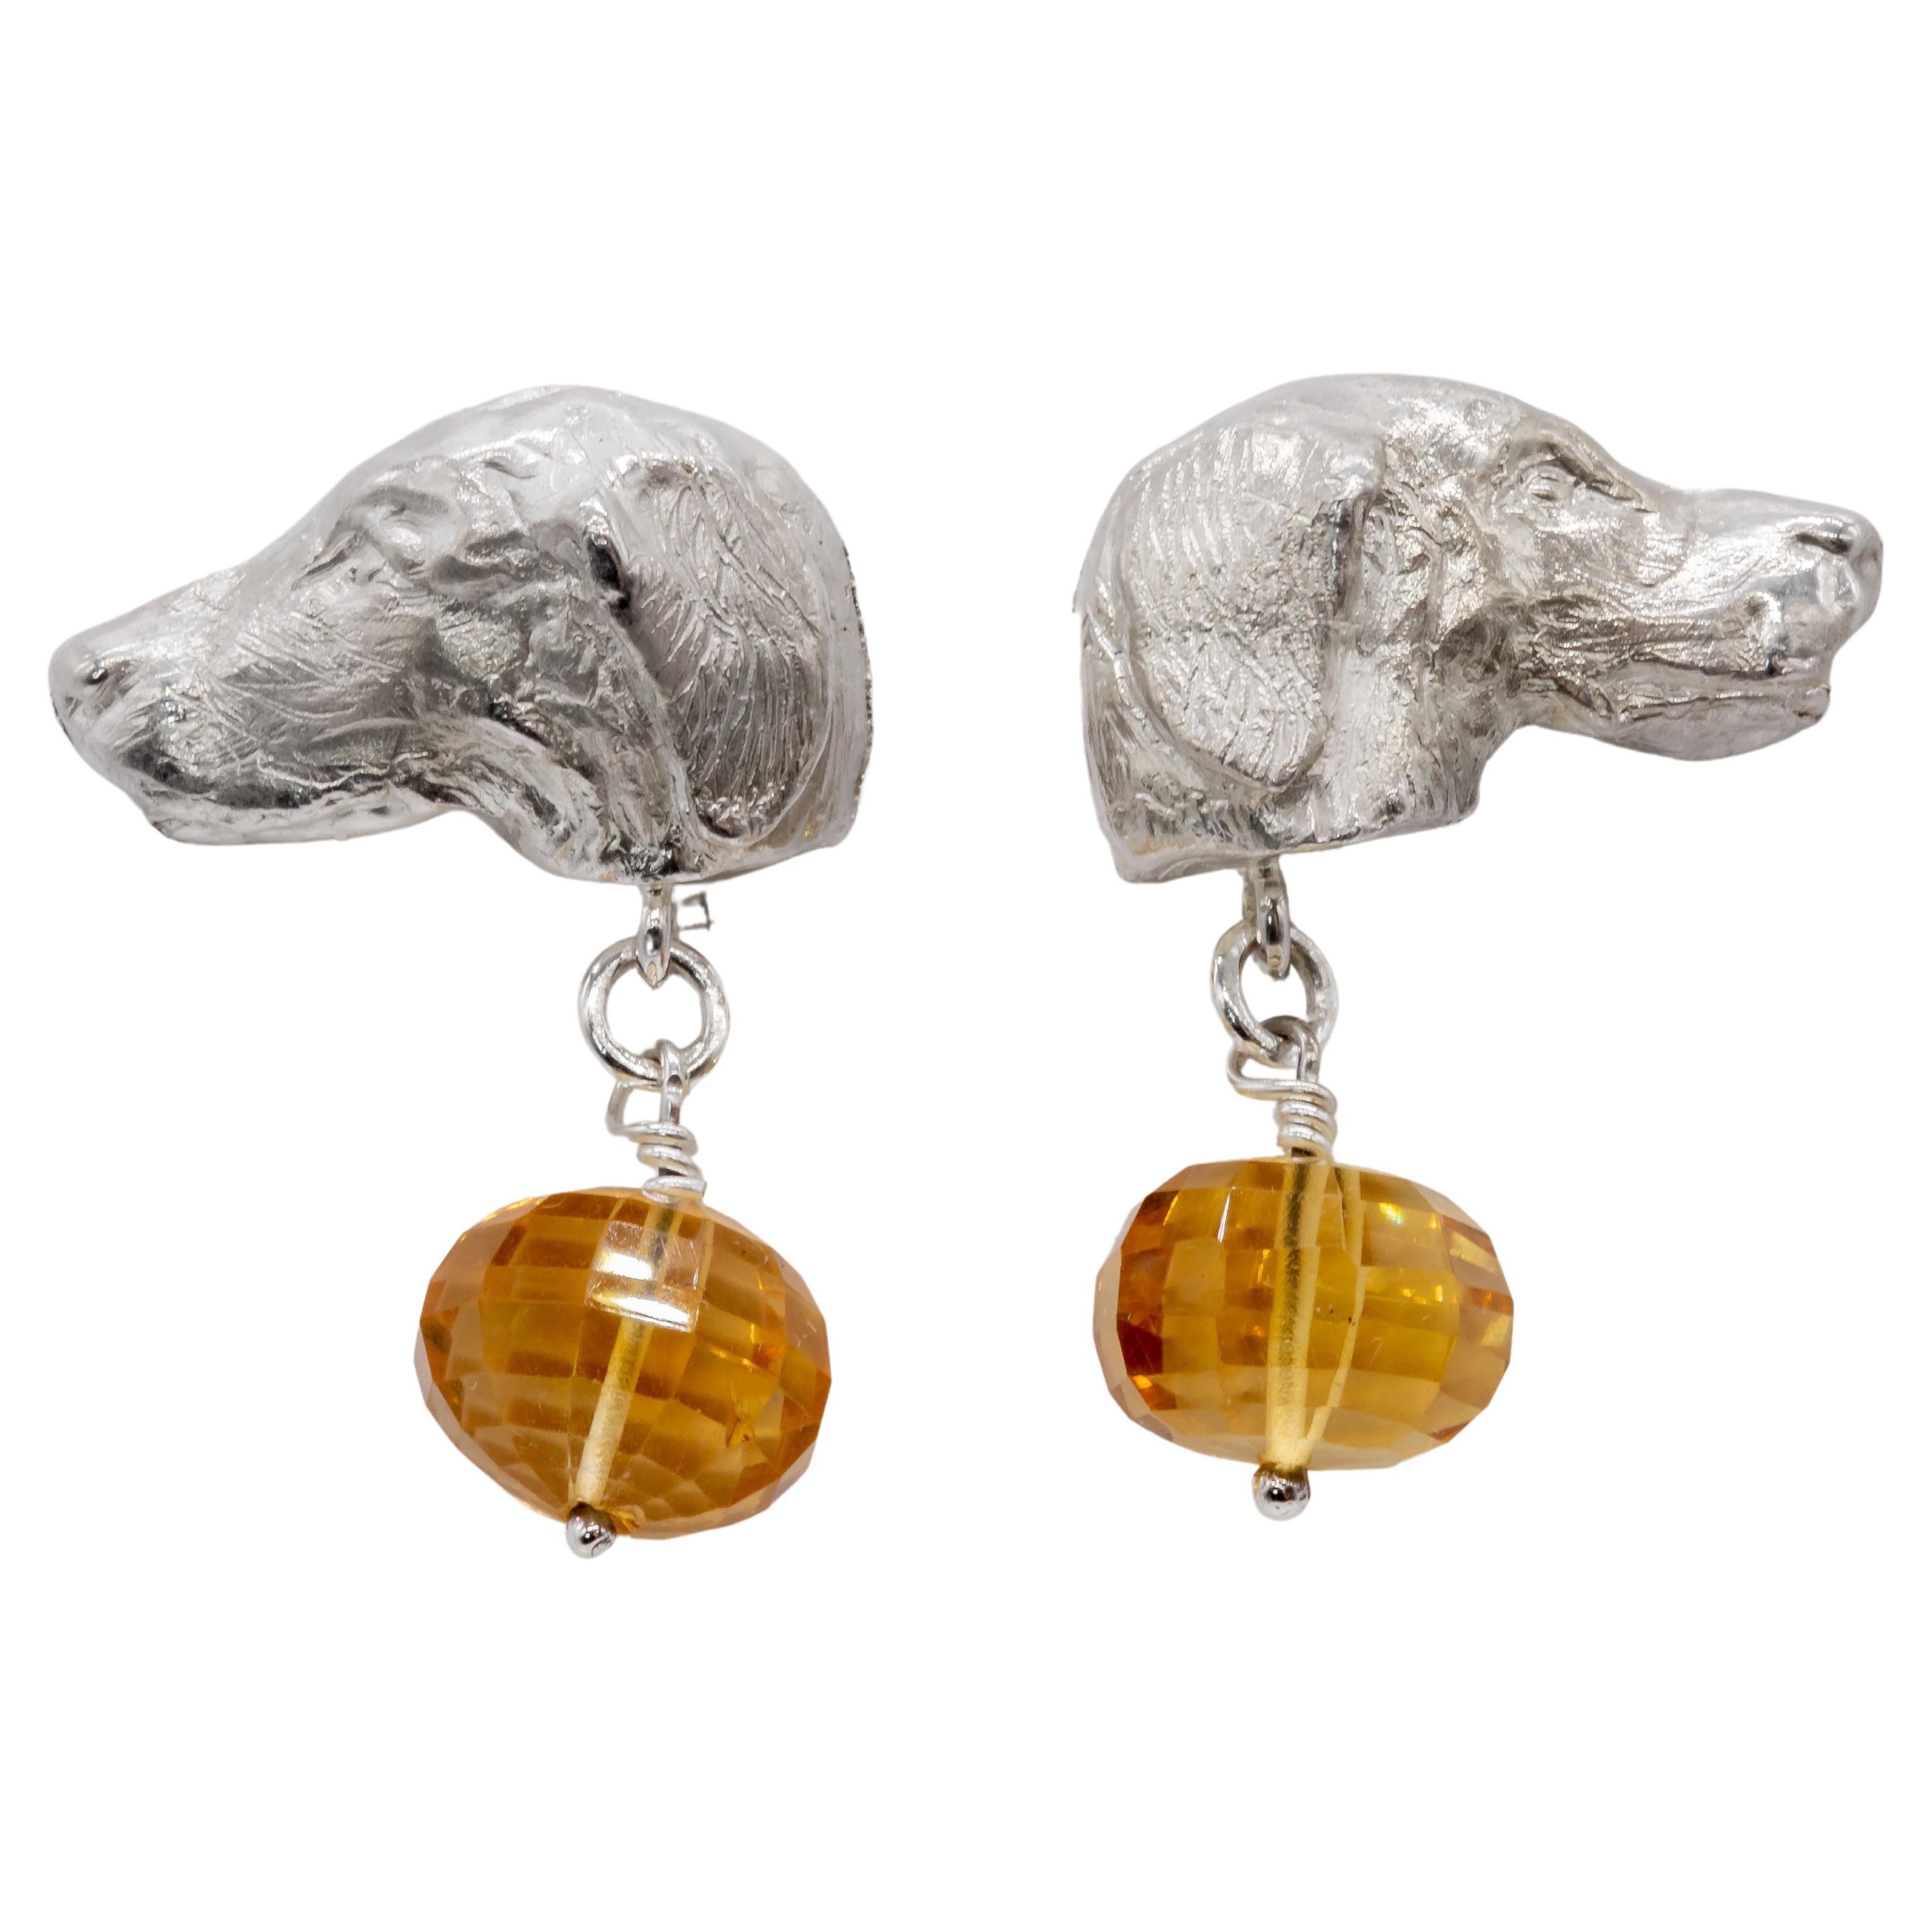 Paul Eaton Sculpted Retriever Dog Heads with Citrine Drop Silver Stud Earrings For Sale